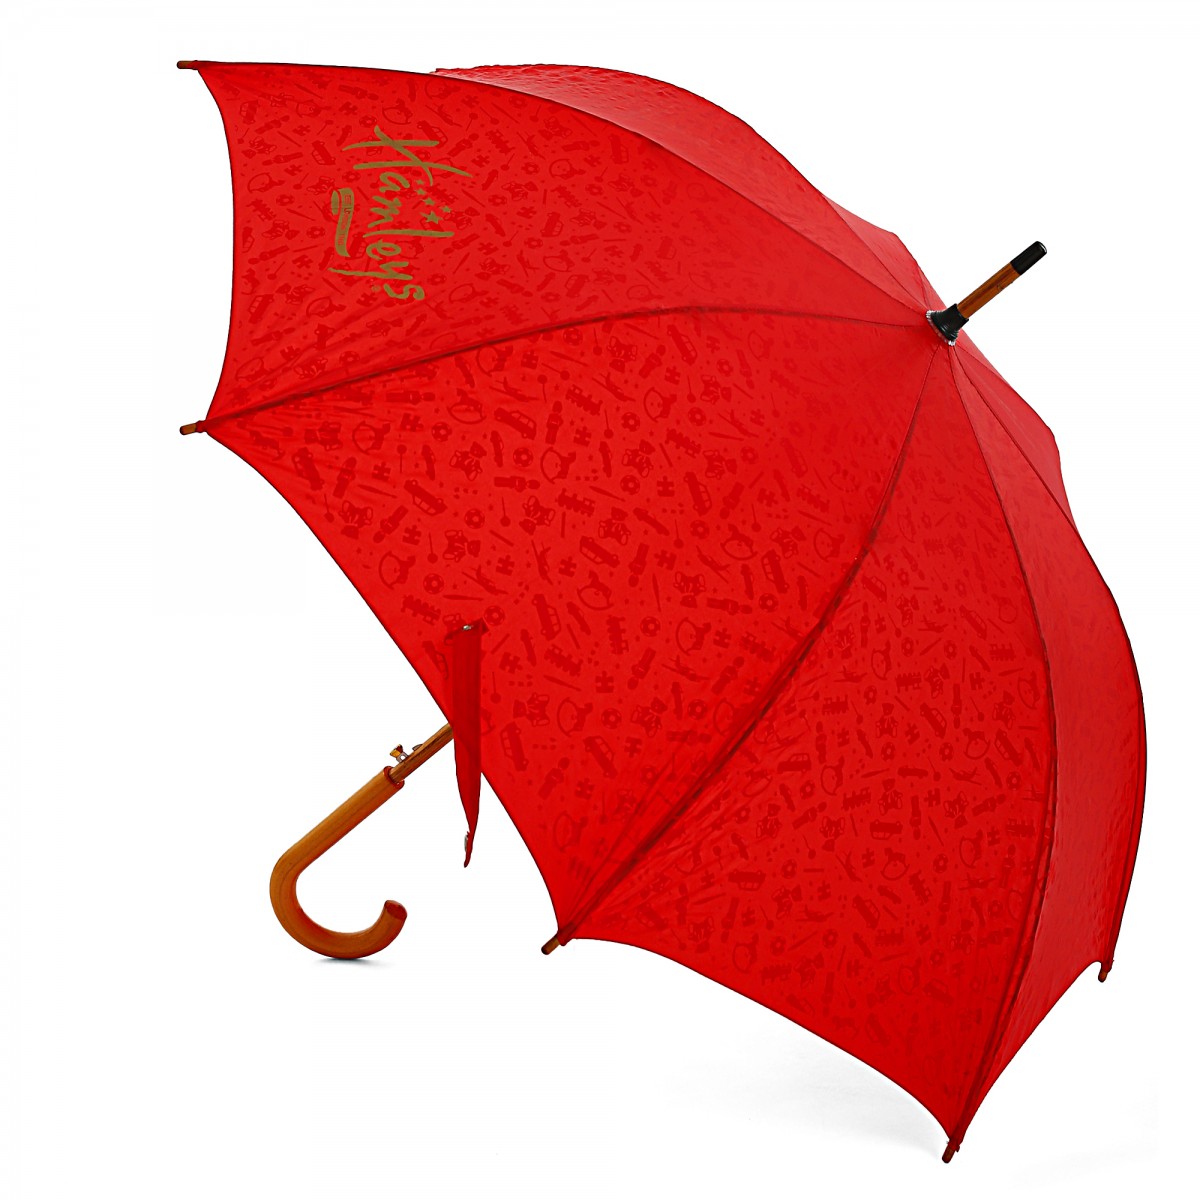 Hamleys London Print 28 inches Single Fold Rain Umbrella with Wooden Bend Handle and Auto Open Long Umbrellas, Kids for 5Y+, Red